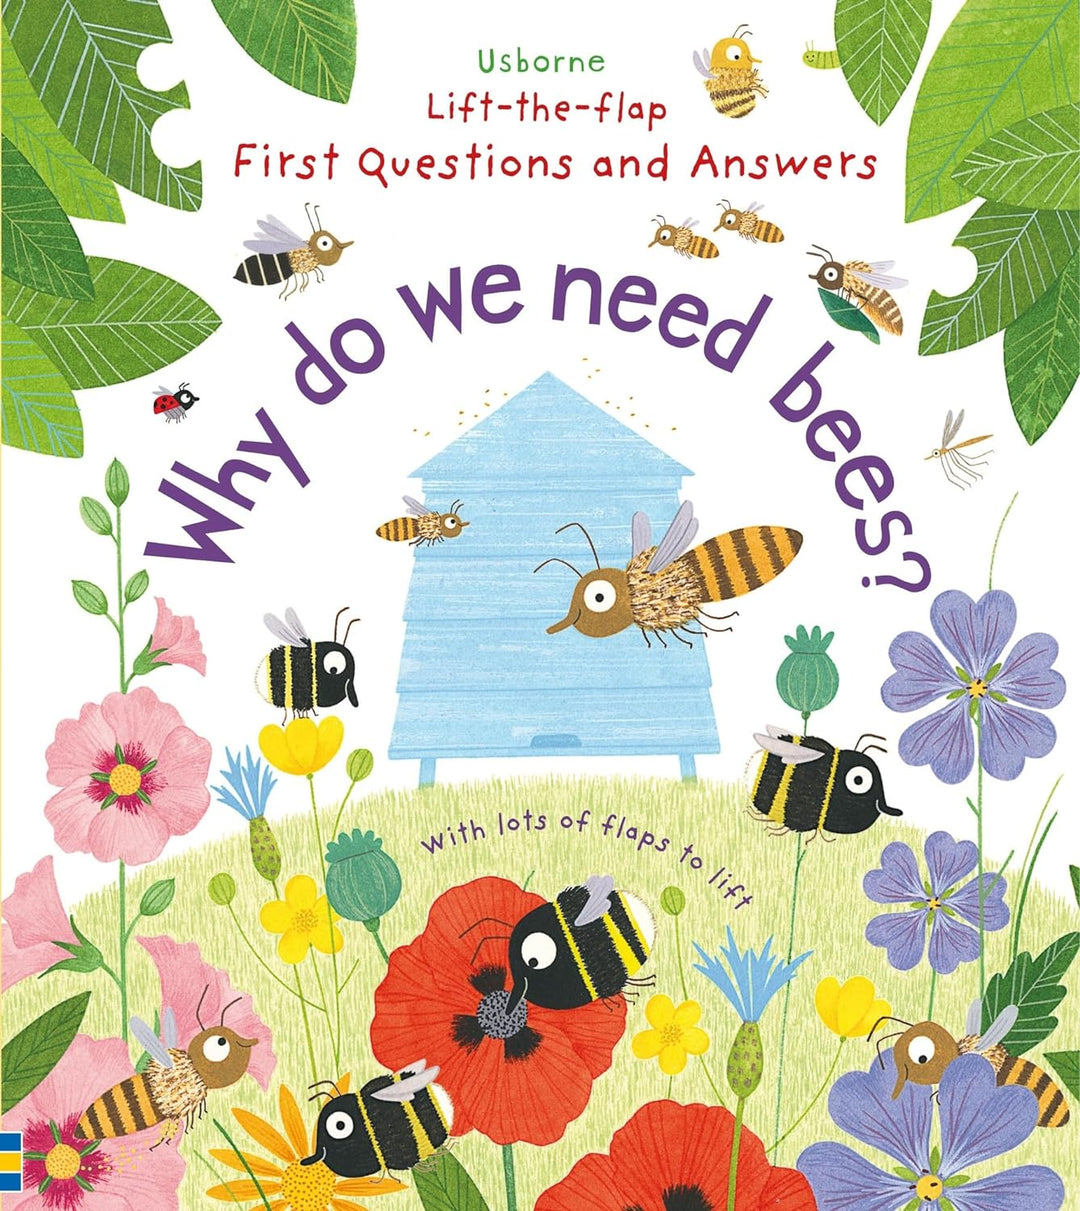 Why Do We Need Bees? Interactive book